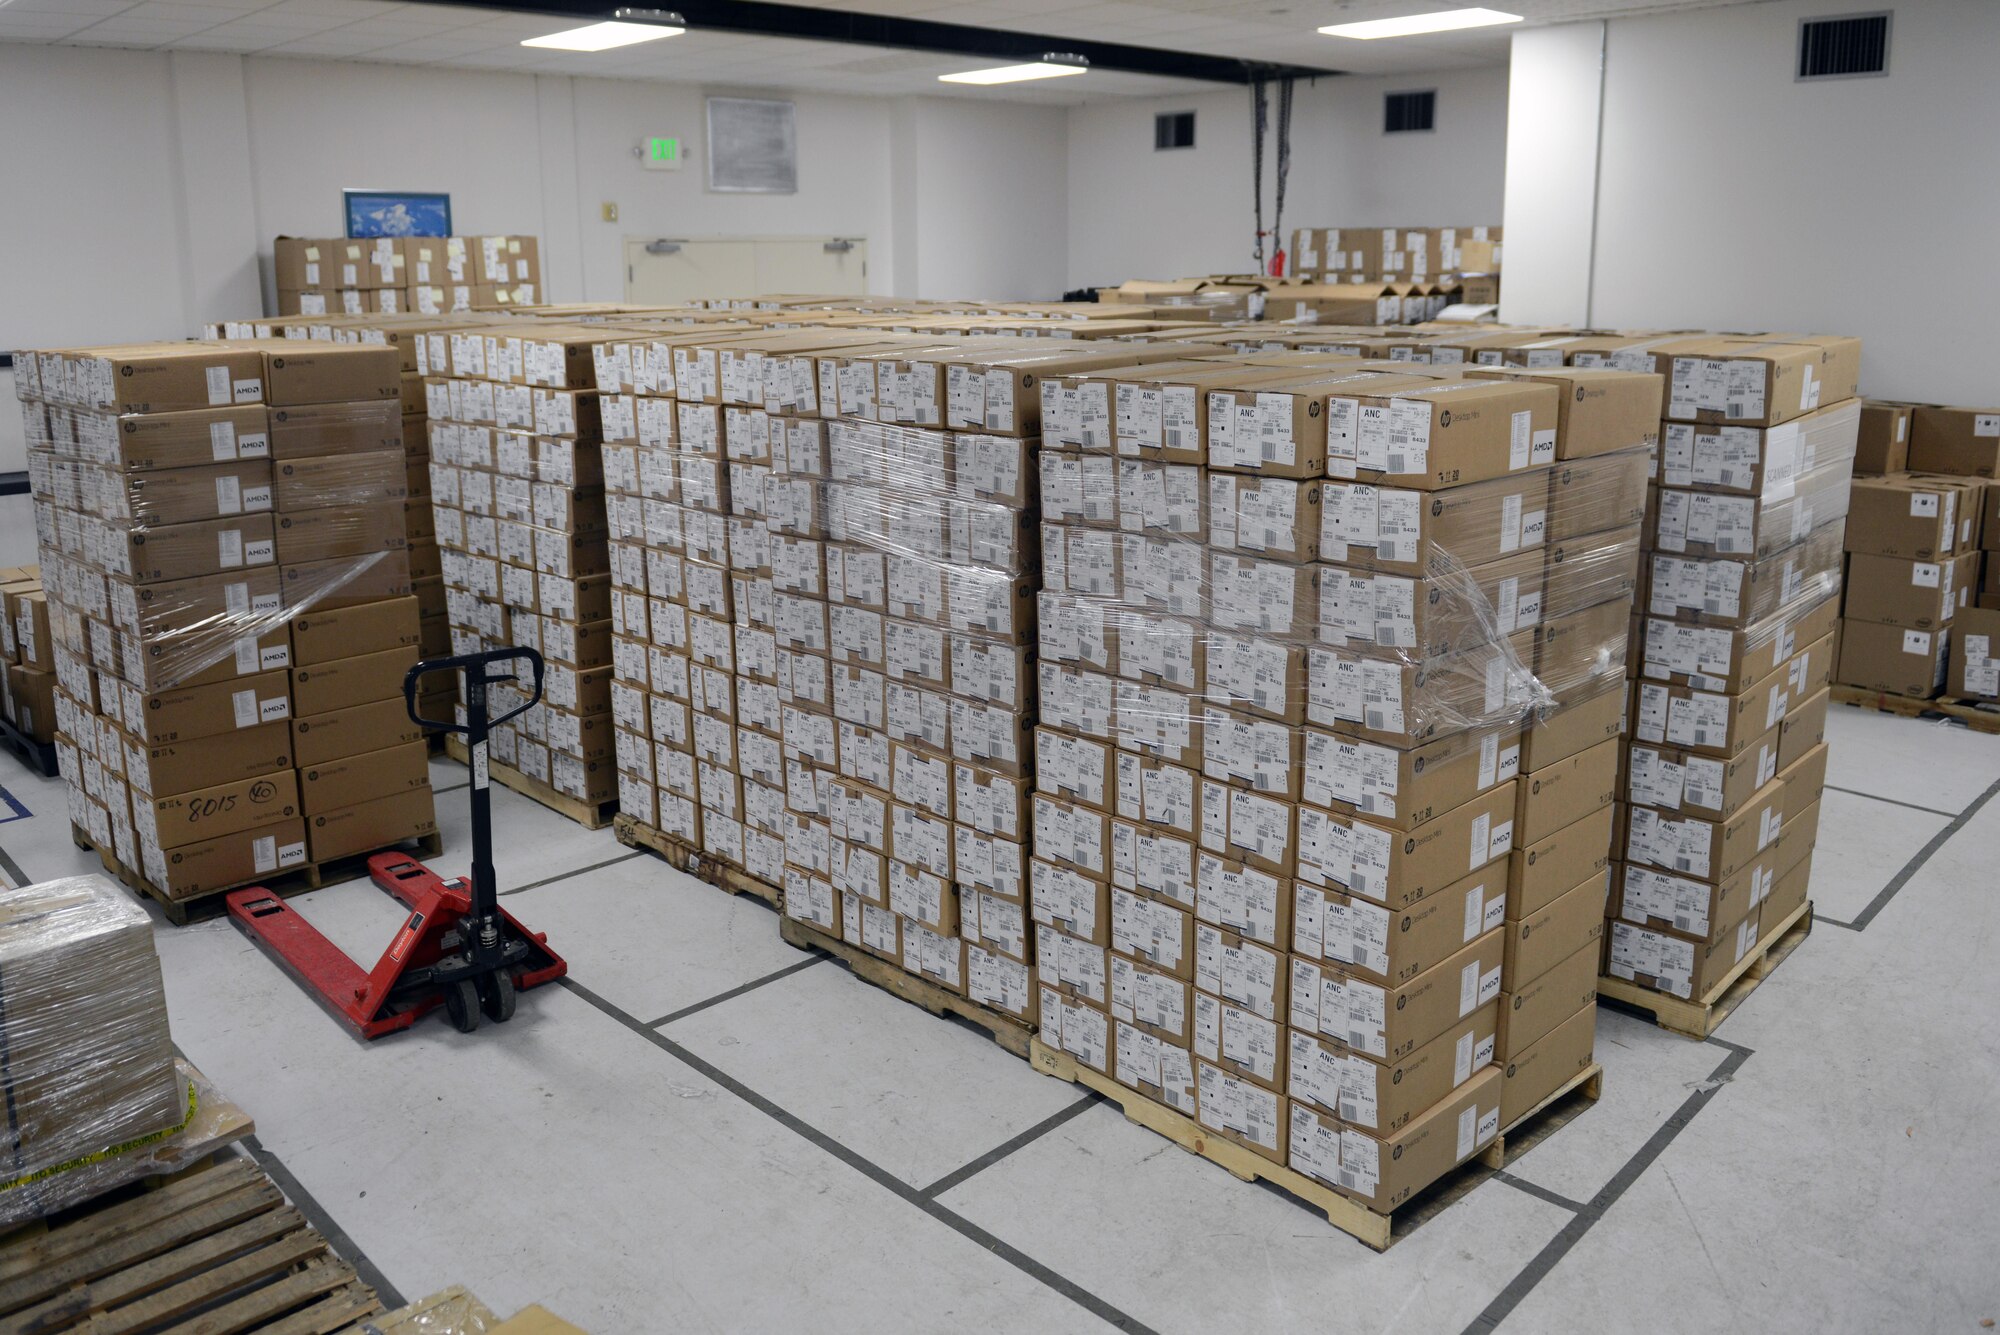 The 673d Communication Squadron houses hundreds of computers to be imaged for the Department of Defense-mandated Microsoft Windows 10 rollout project at Joint Base Elmendorf-Richardson, Alaska, Nov. 20, 2017. After the computers are imaged, they are temporarily stored in this small warehouse before being delivered to the next building ready for their computers to be replaced.